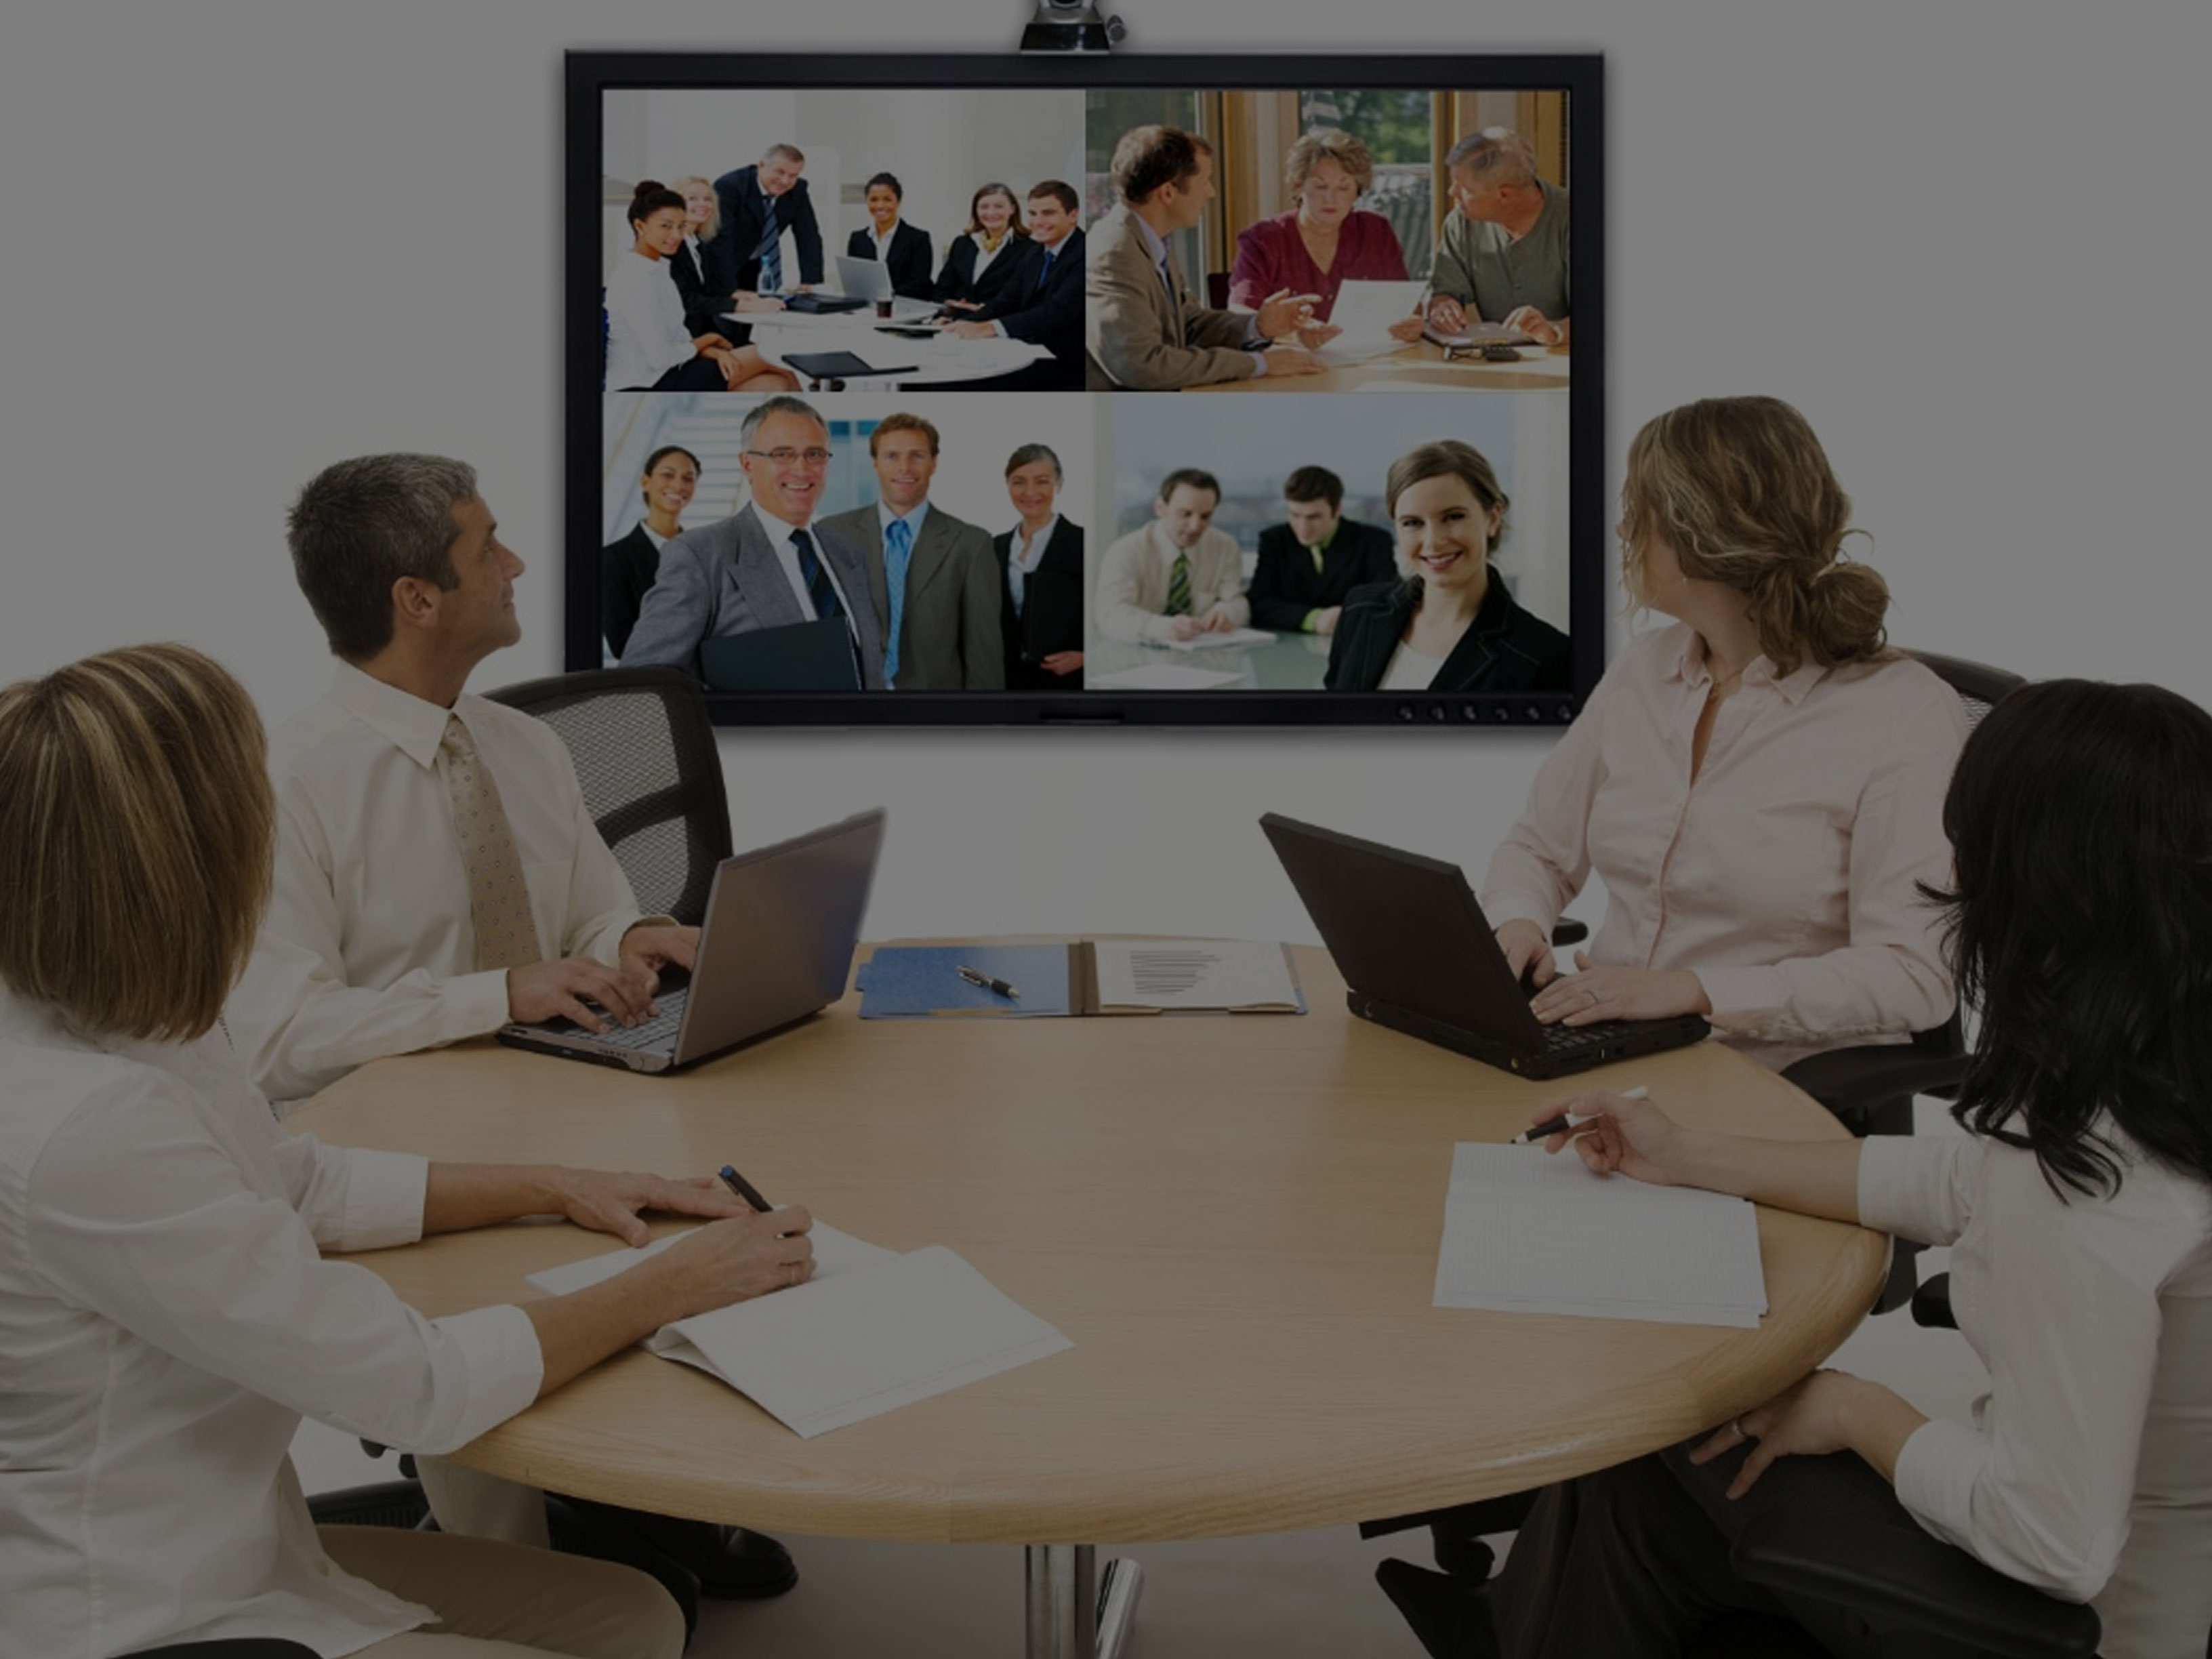 Video conference and Live Webcasting services